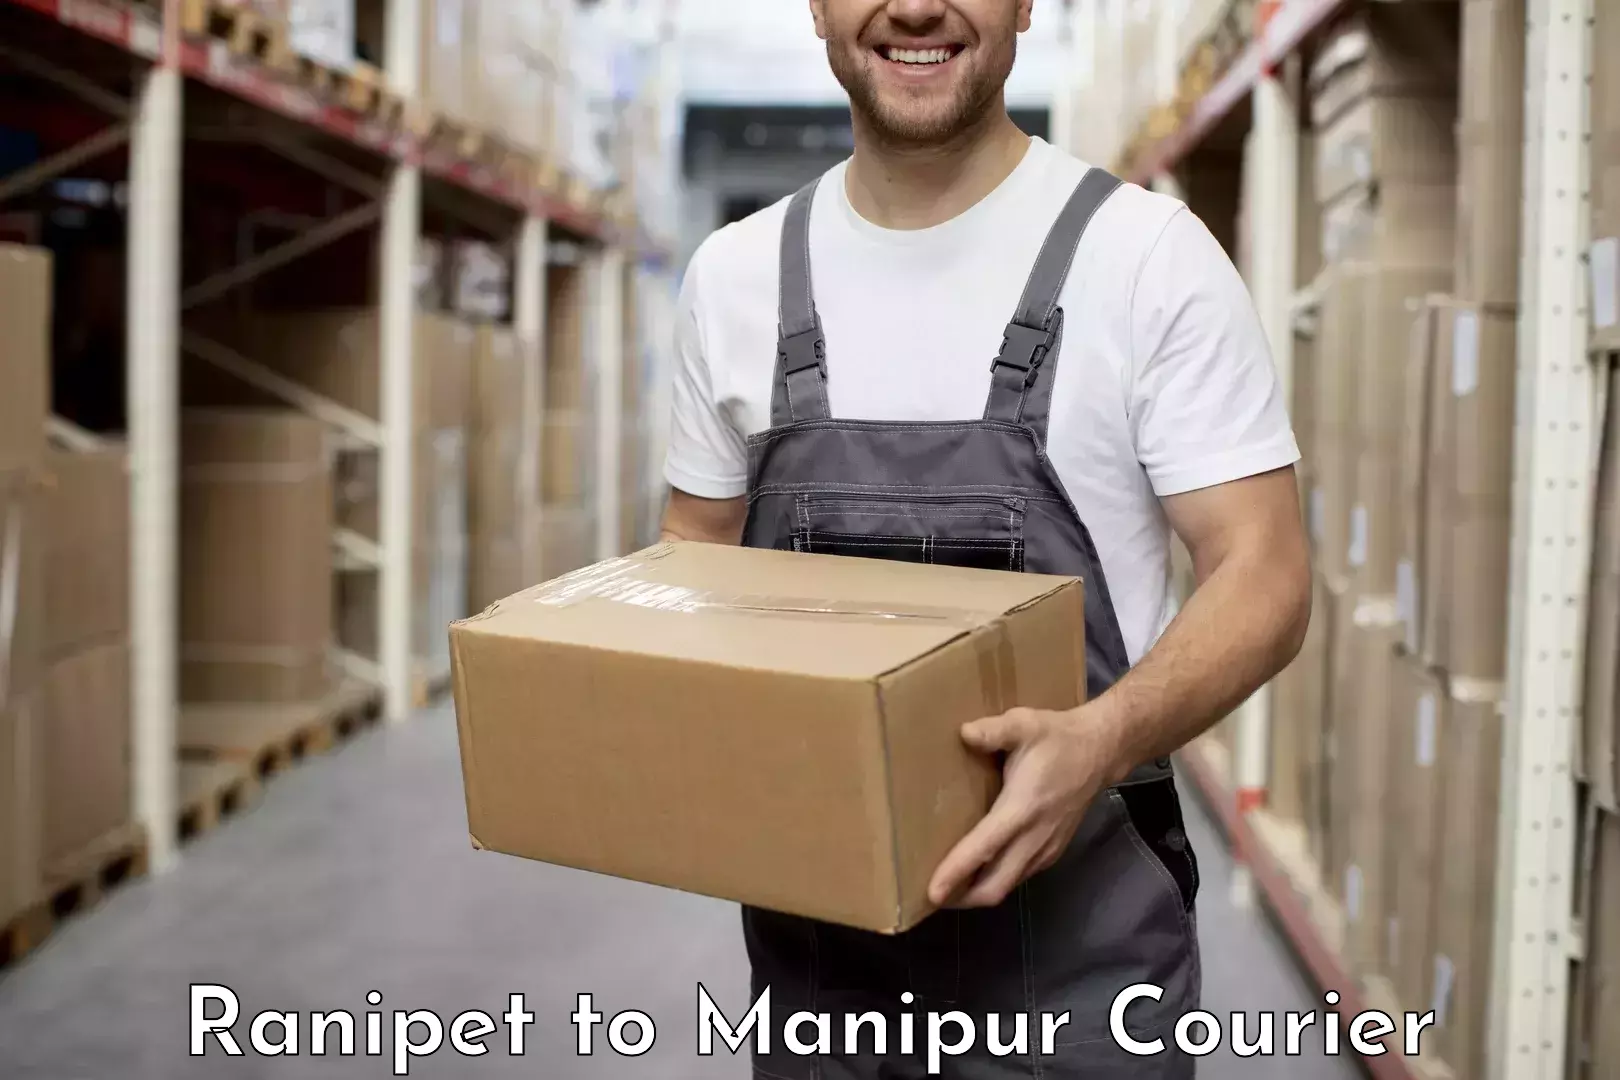 Professional courier handling Ranipet to Chandel